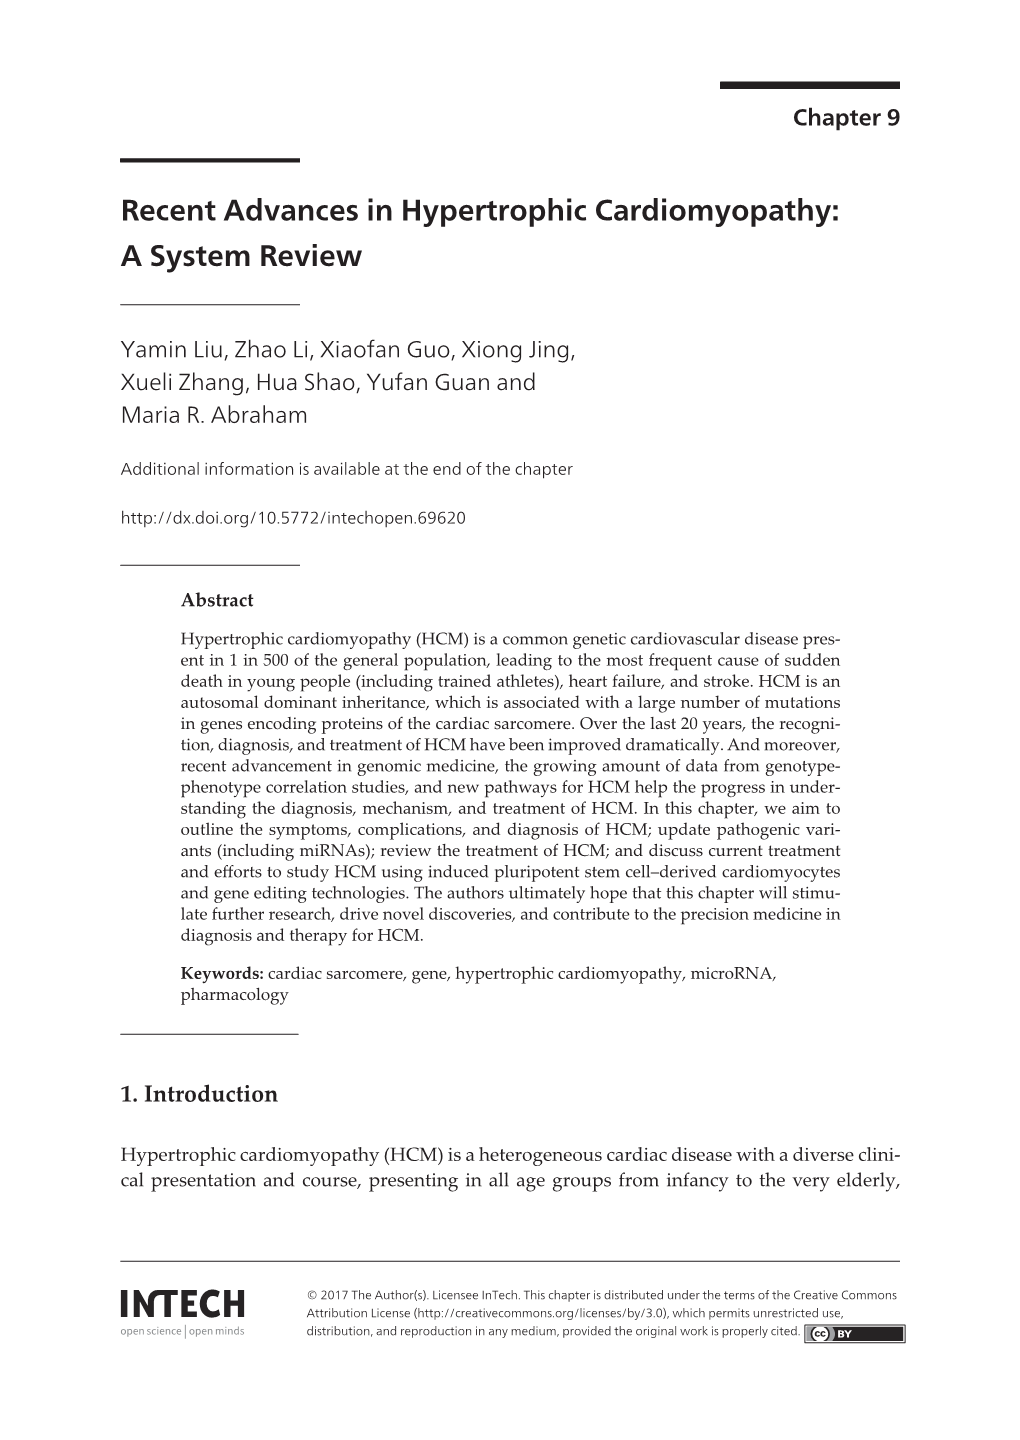 Recent Advances in Hypertrophic Cardiomyopathy: a System Review